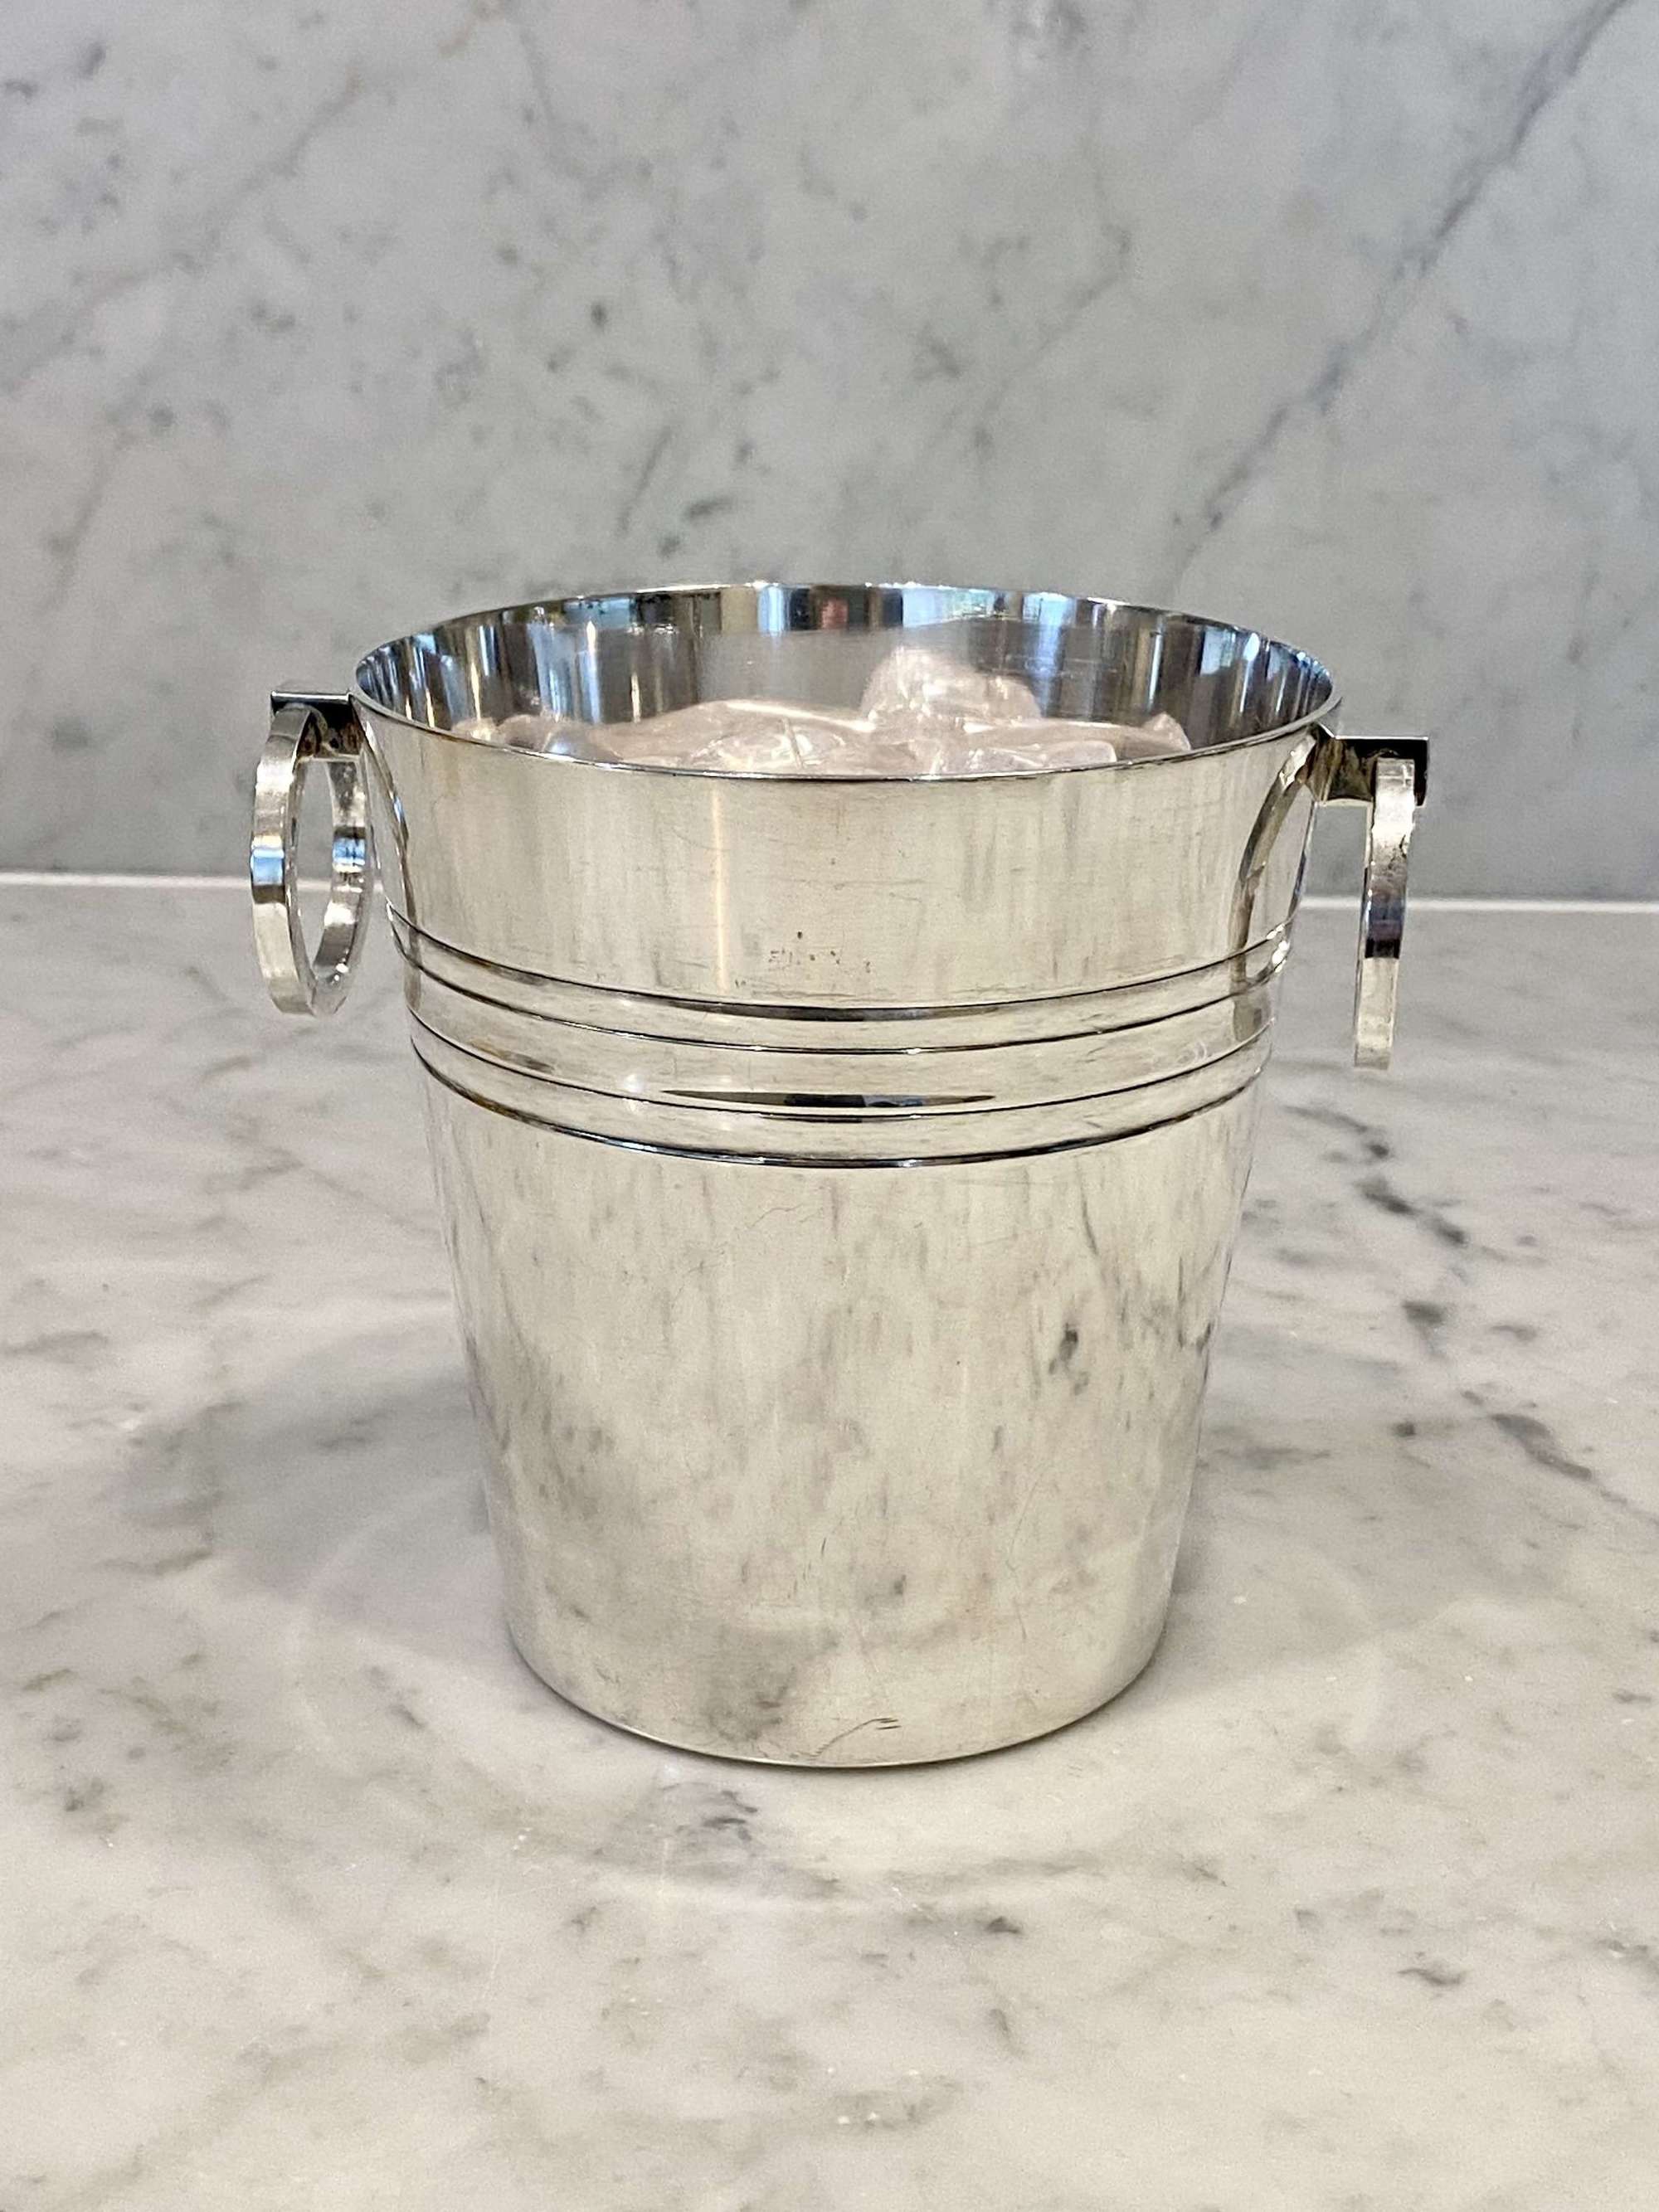 Wiskemann silver plated ring handle ice bucket